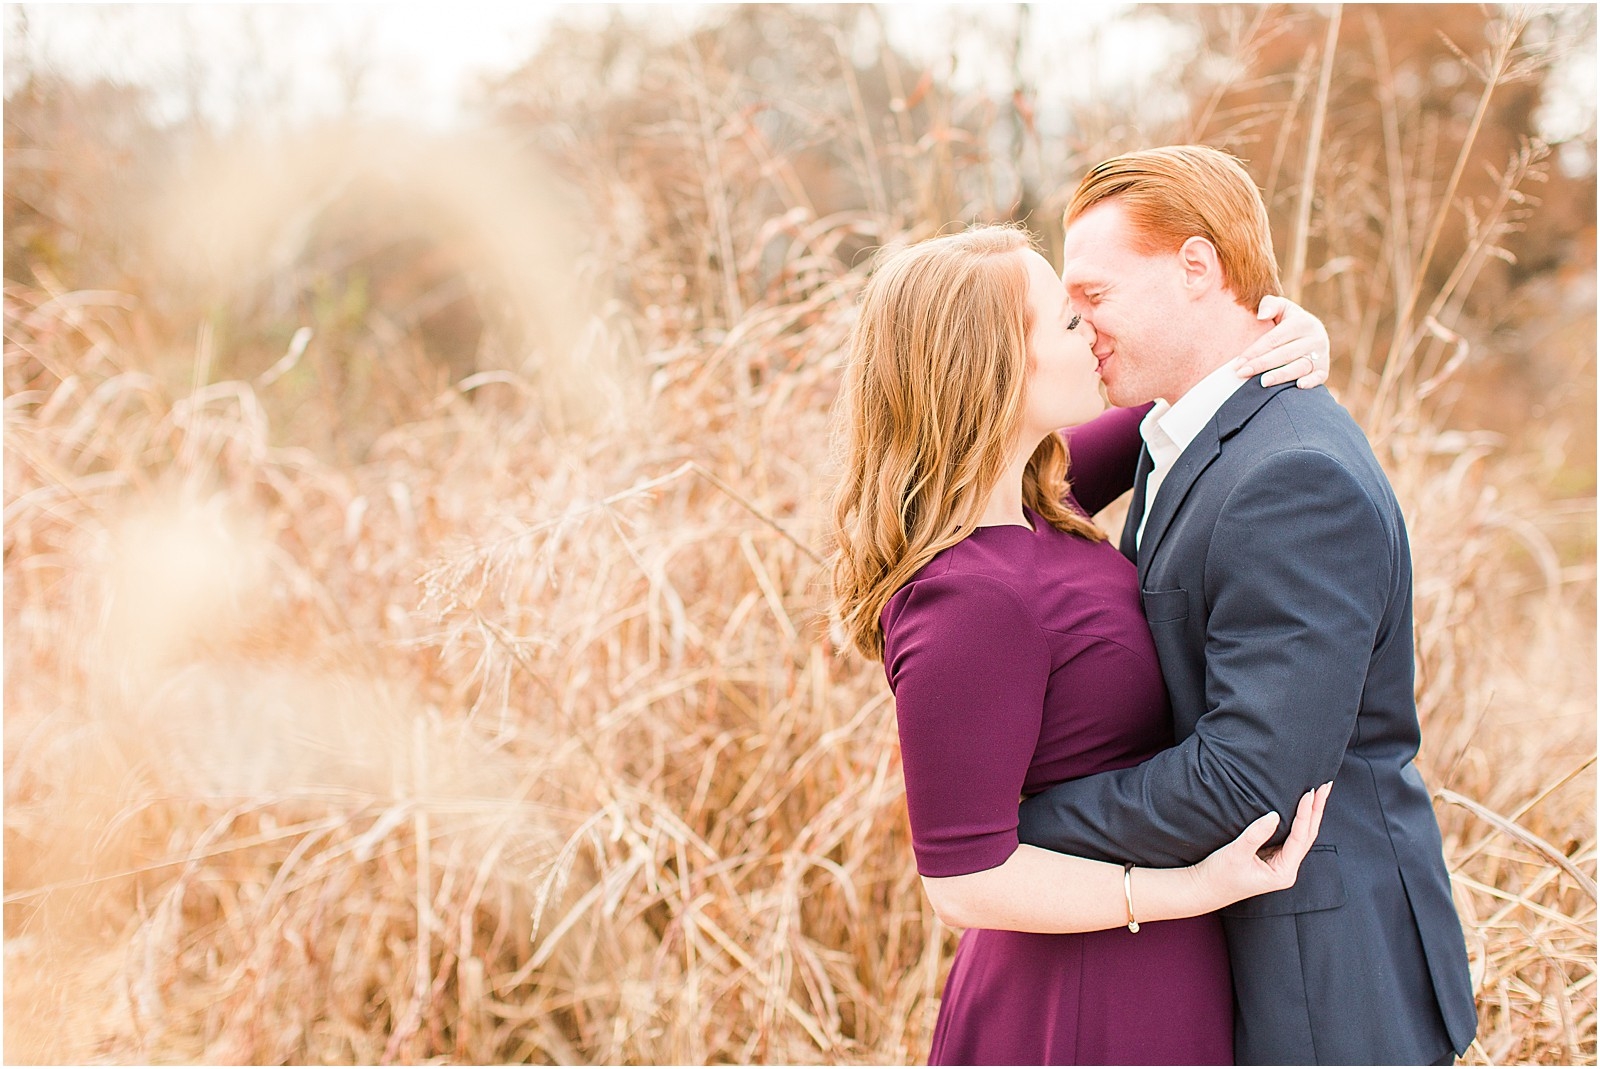 A Mesker Park Zoo Engagement Session | Jennah and Steve | Bret and Brandie Photography003.jpg